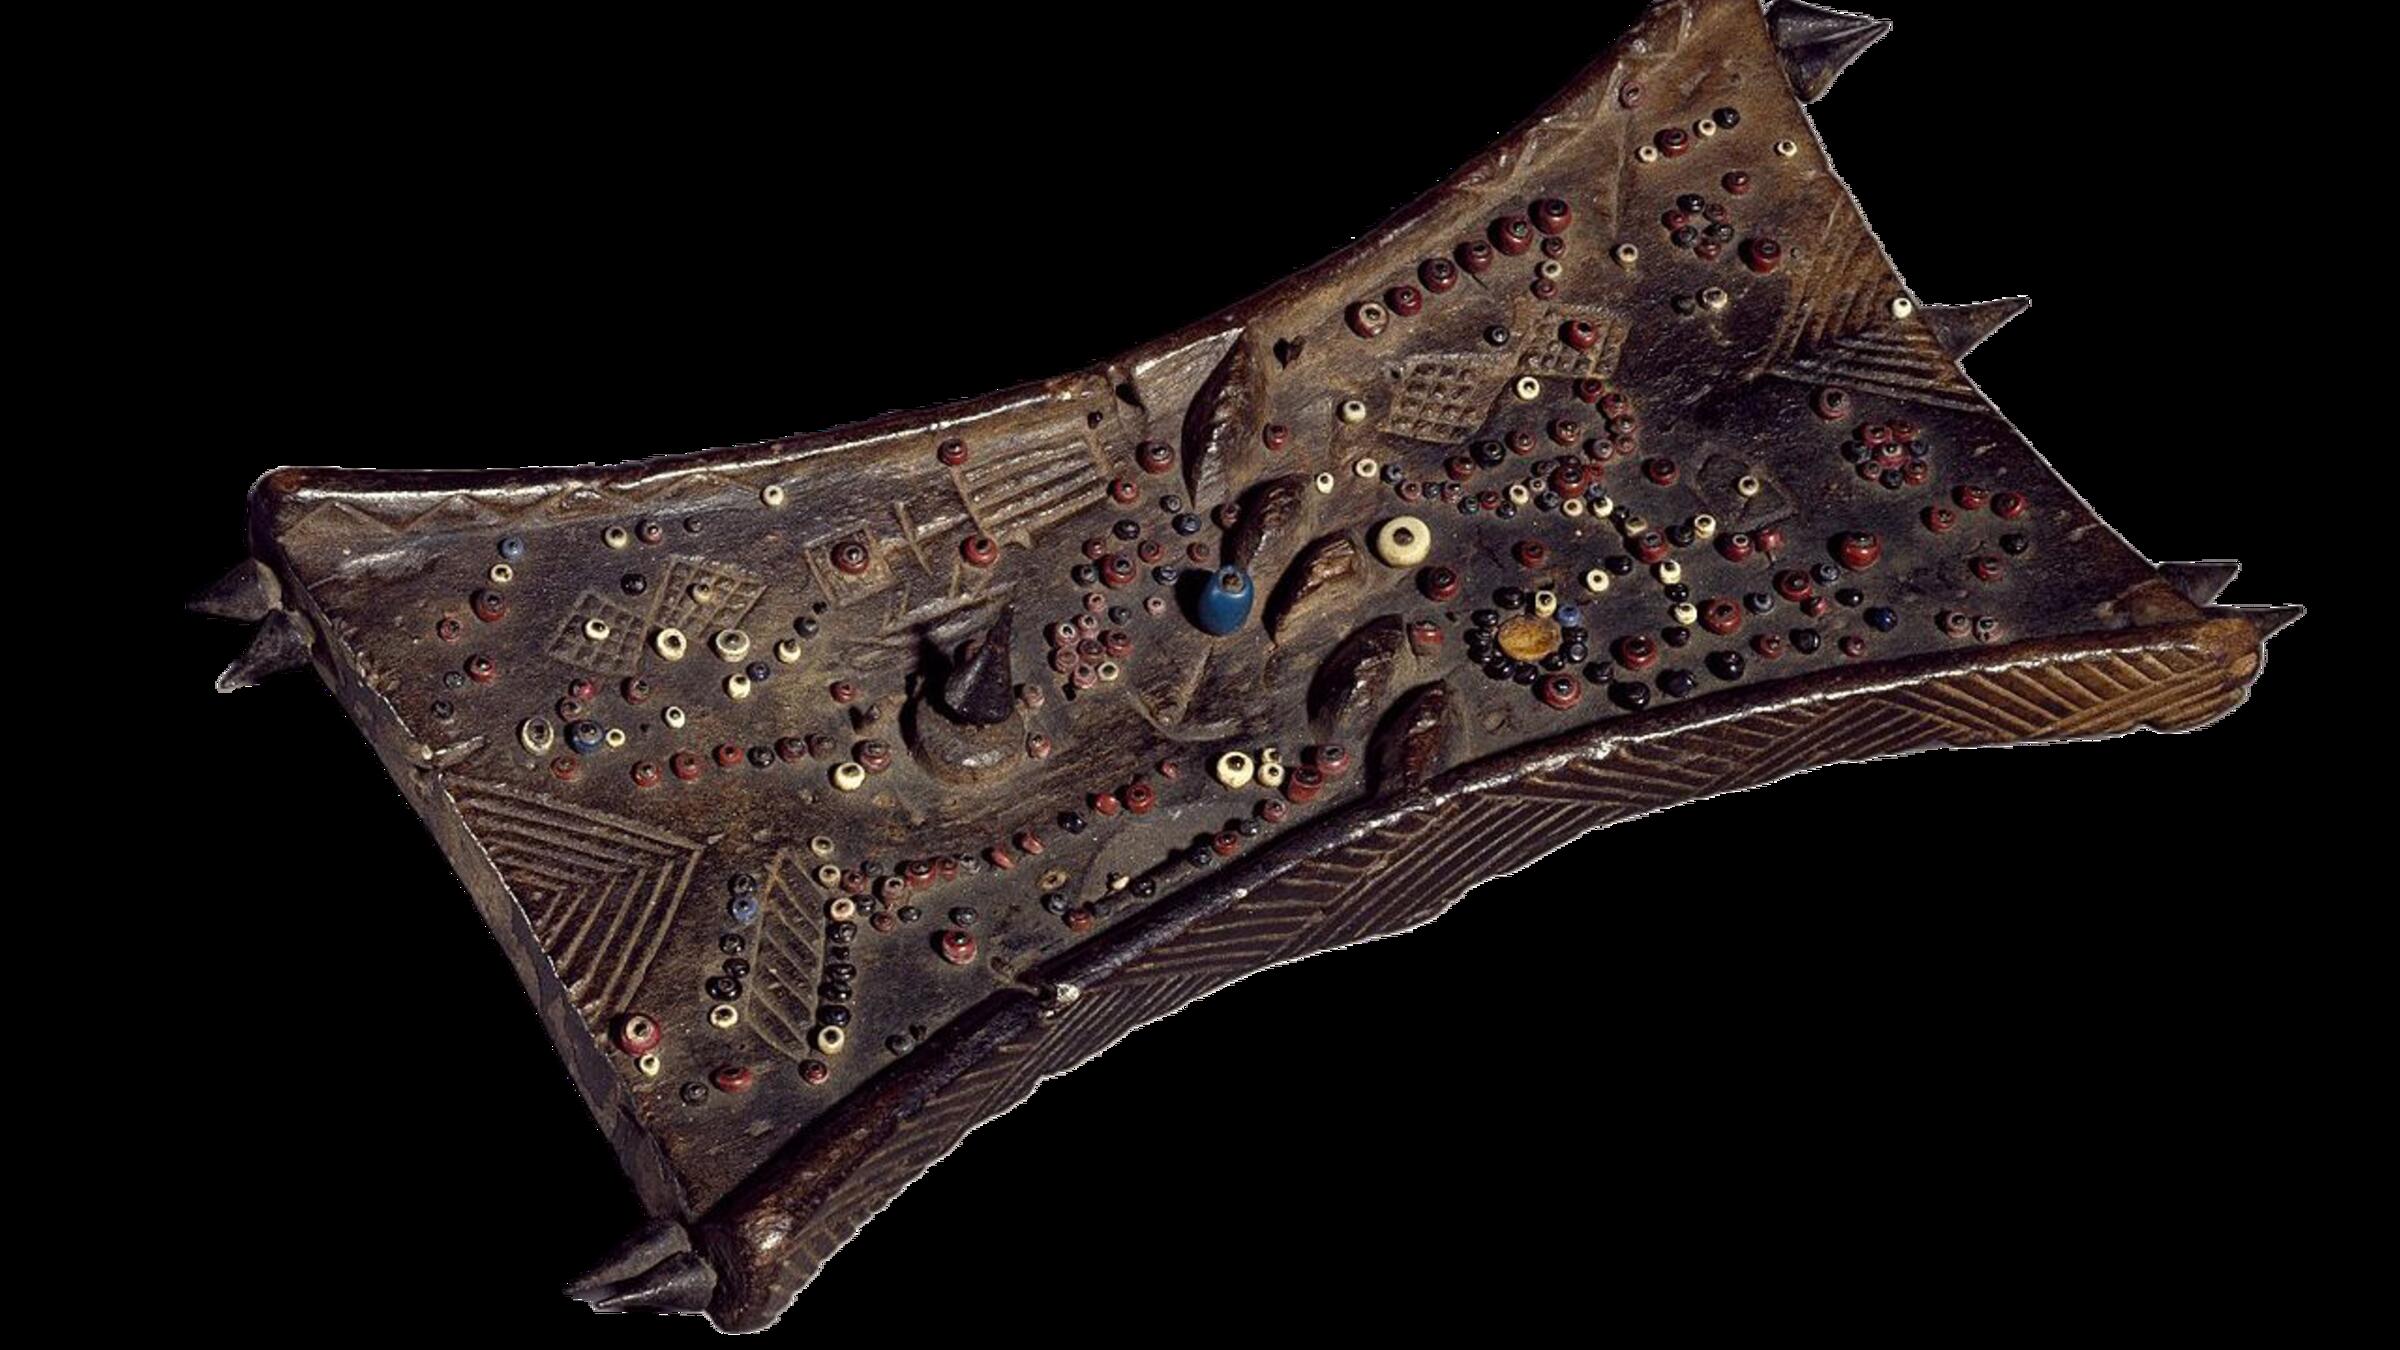 Lukasa memory board, hourglass-shaped wooden tablet covered with multicolored beads and carved symbols